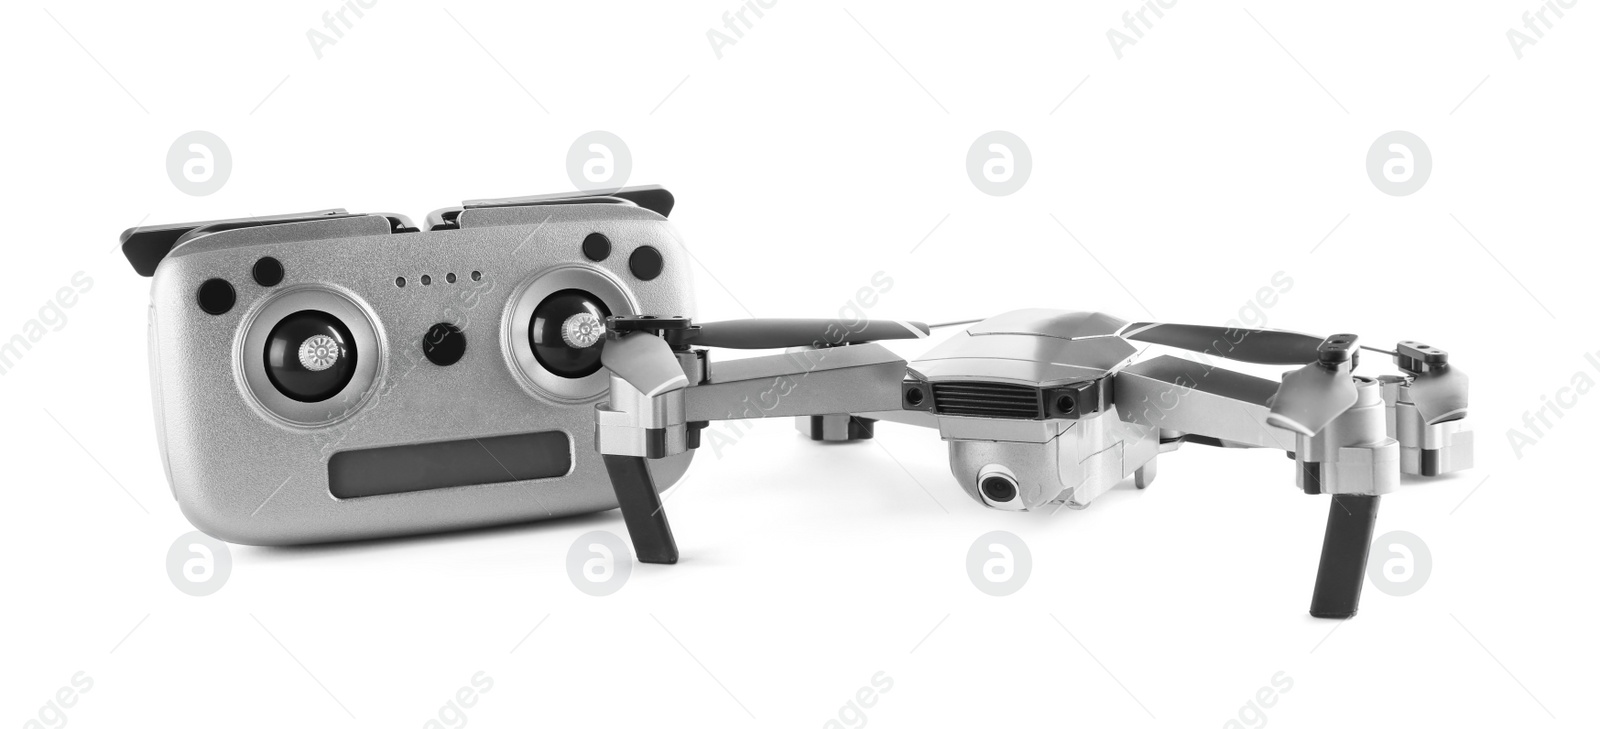 Photo of Modern drone with controller isolated on white